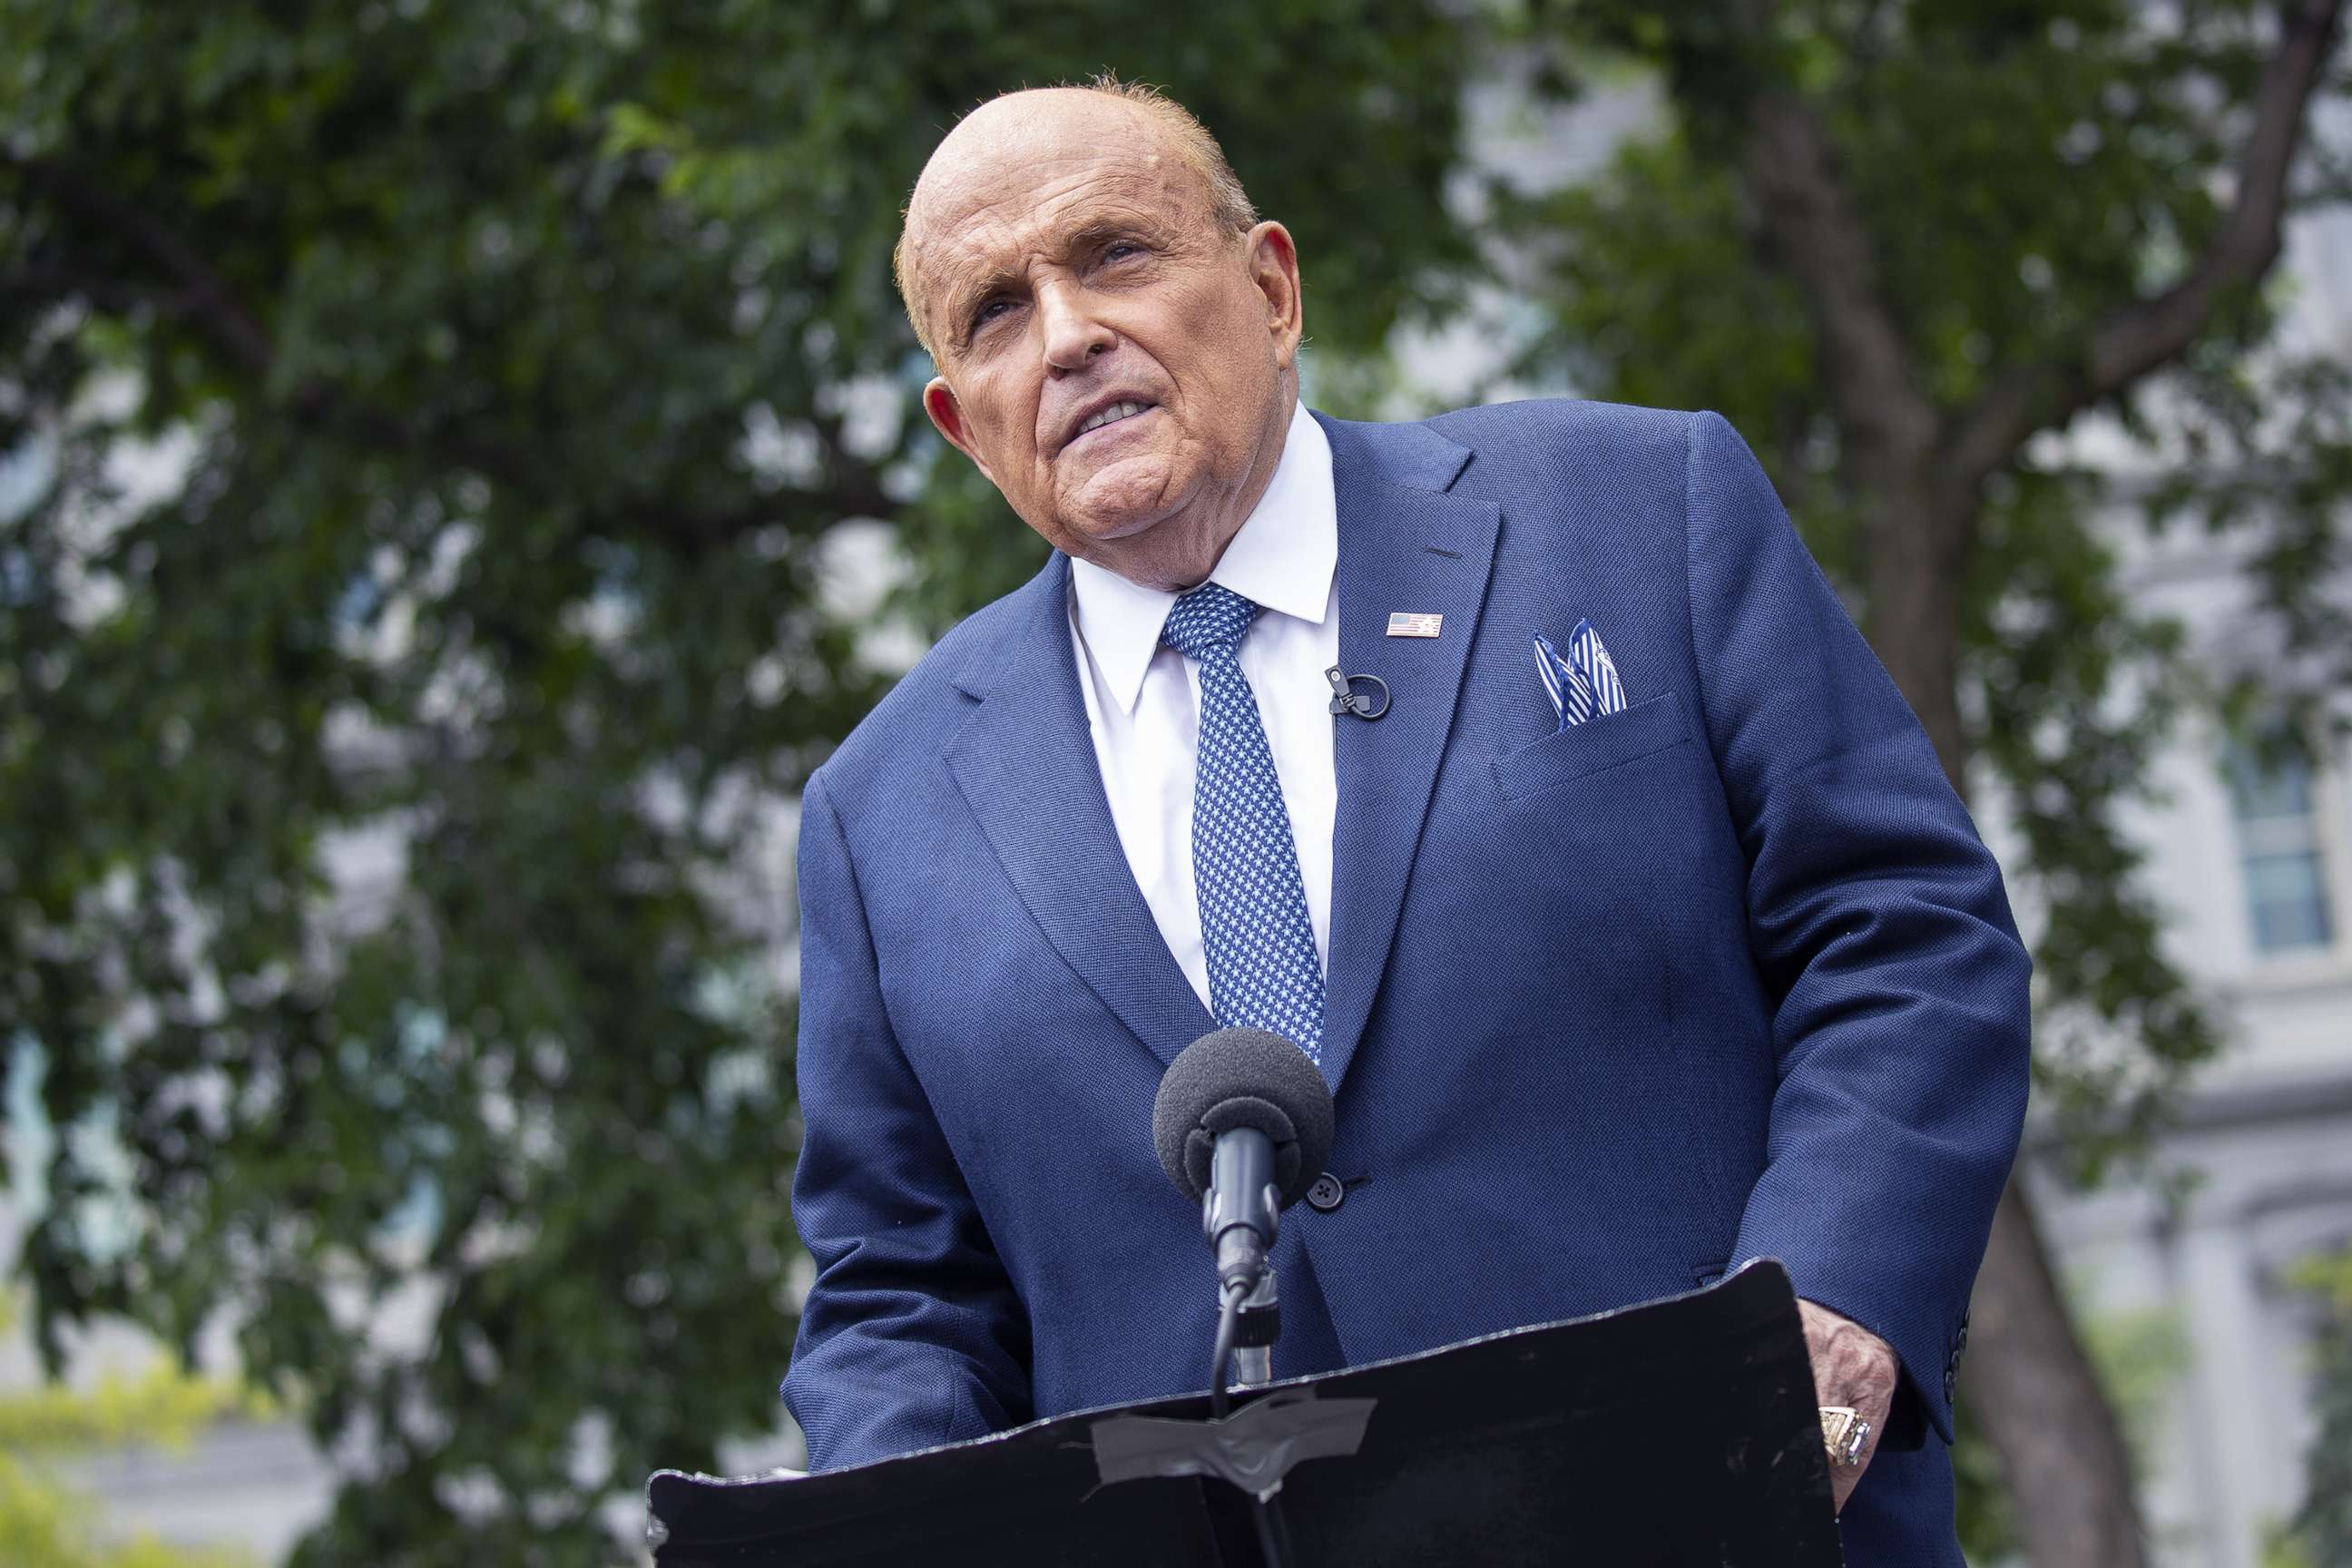 PHOTO: Rudy Giuliani, personal lawyer to President Donald Trump, speaks to members of the media following a television interview outside the White House, July 1, 2020.